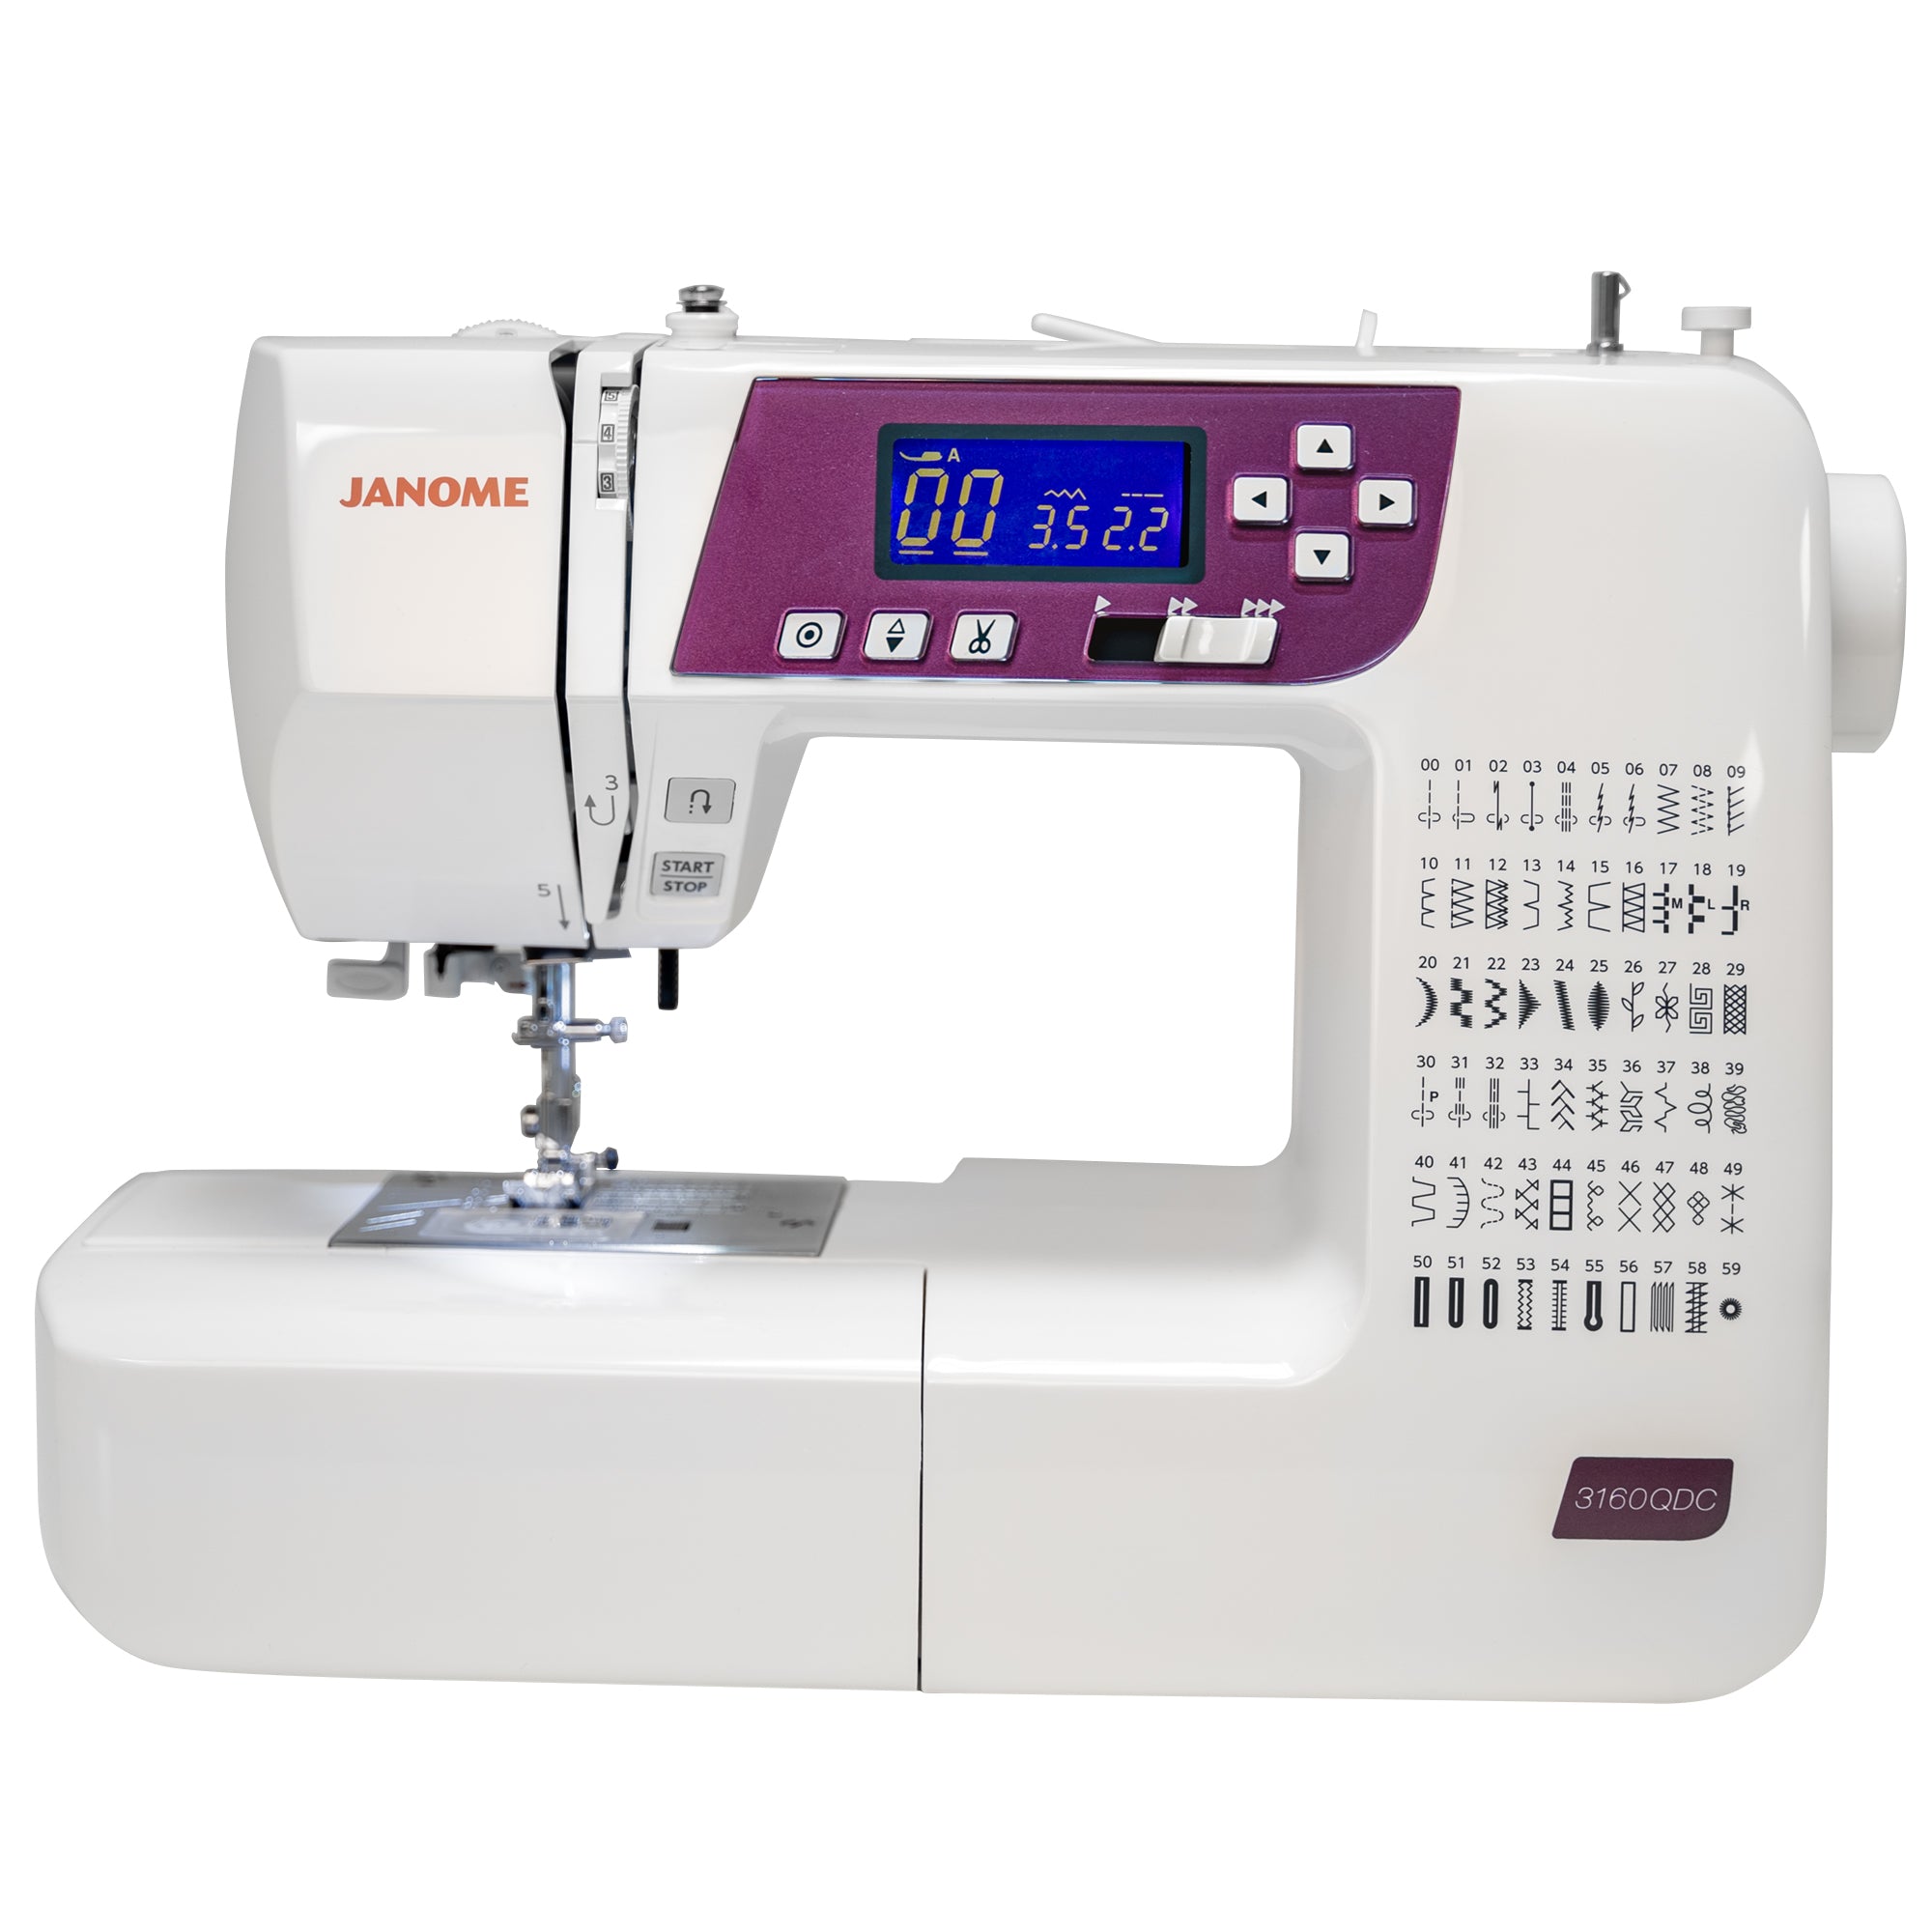 front facing image of the Janome 3160QDC-G Sewing and Quilting Machine